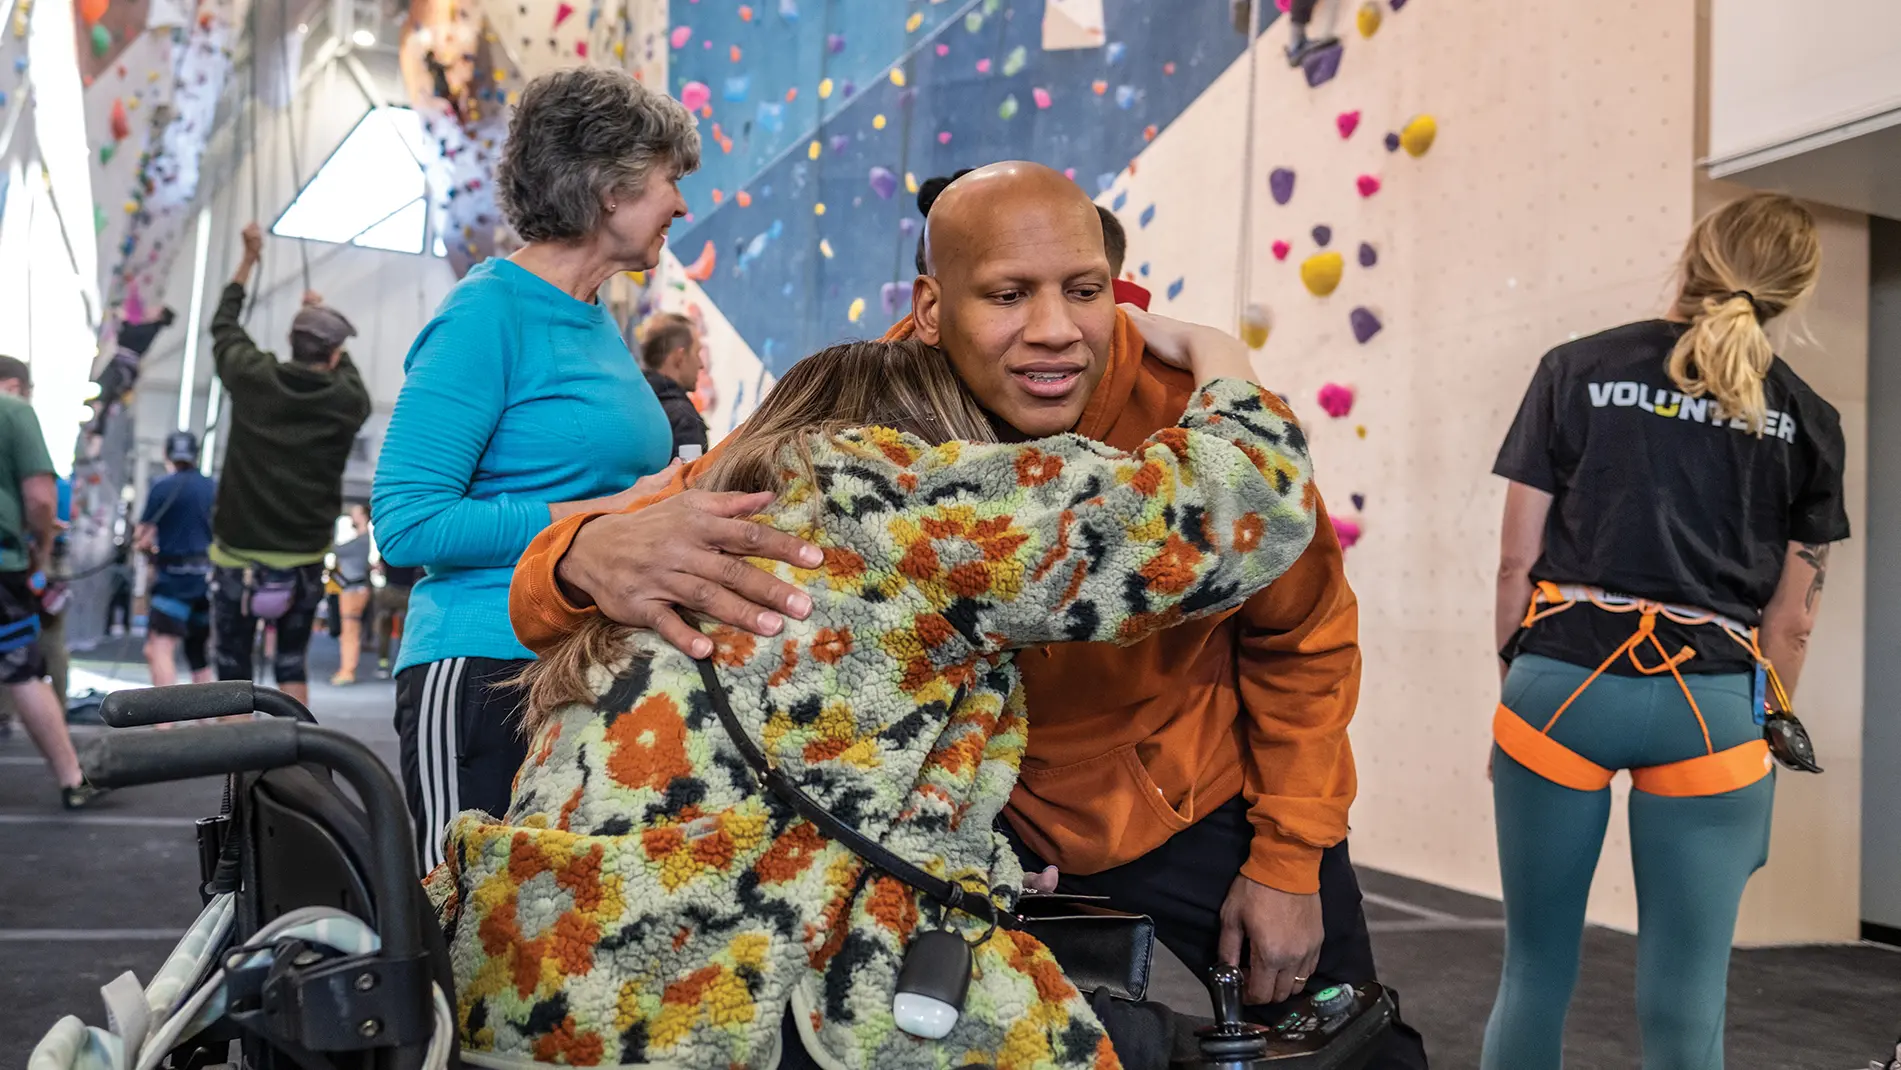 At a gym where a giant climbing wall is scattered with colorful hand holds, a Black man in a sweatshirt bends forward to hug a woman in a wheelchair. Her face is against his chest and can’t be seen, but he smiles as he pats her back. People behind them are focused on those climbing the wall. 